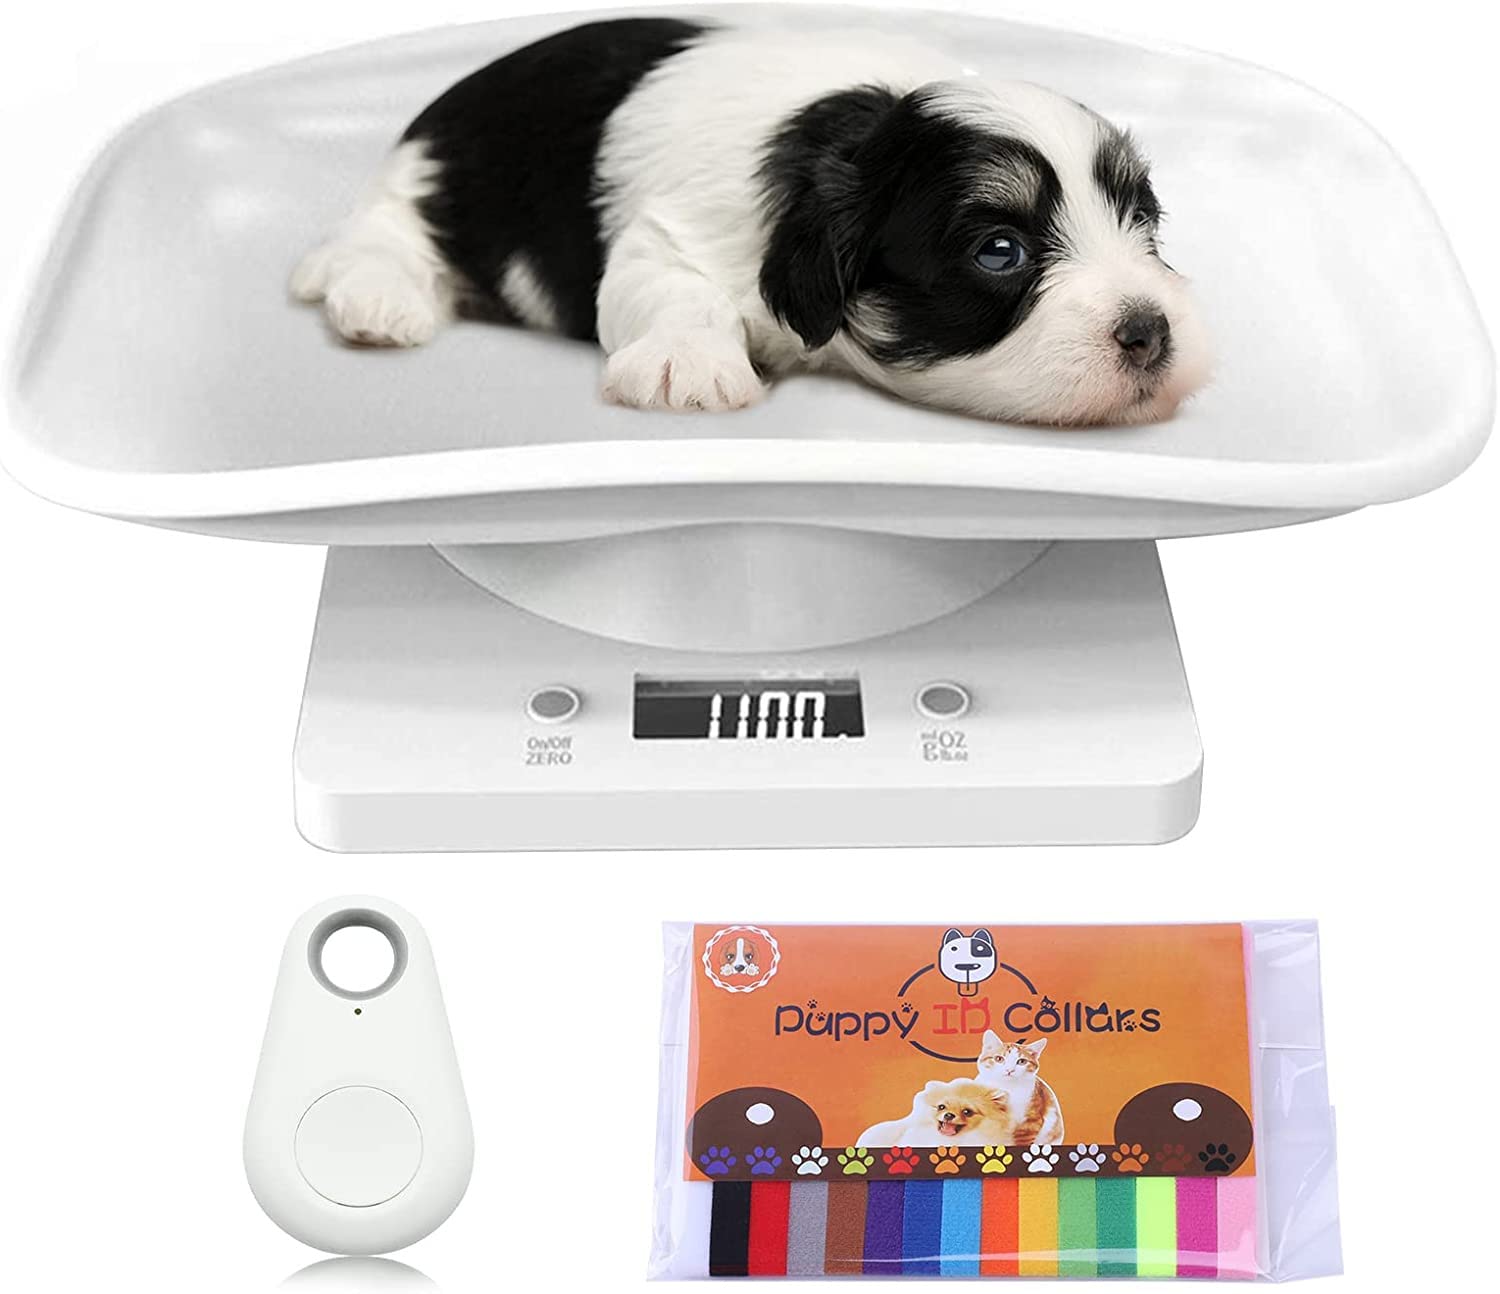 Digital Pet Scale w/Tray Tape,Puppy Scale w/Pet Finder ? 15 Adjustable Collars Small Animal Scale,Multi-Function Electronic Scales Accurately Weigh Your Kitten Rabbit(Max 33 lbs)